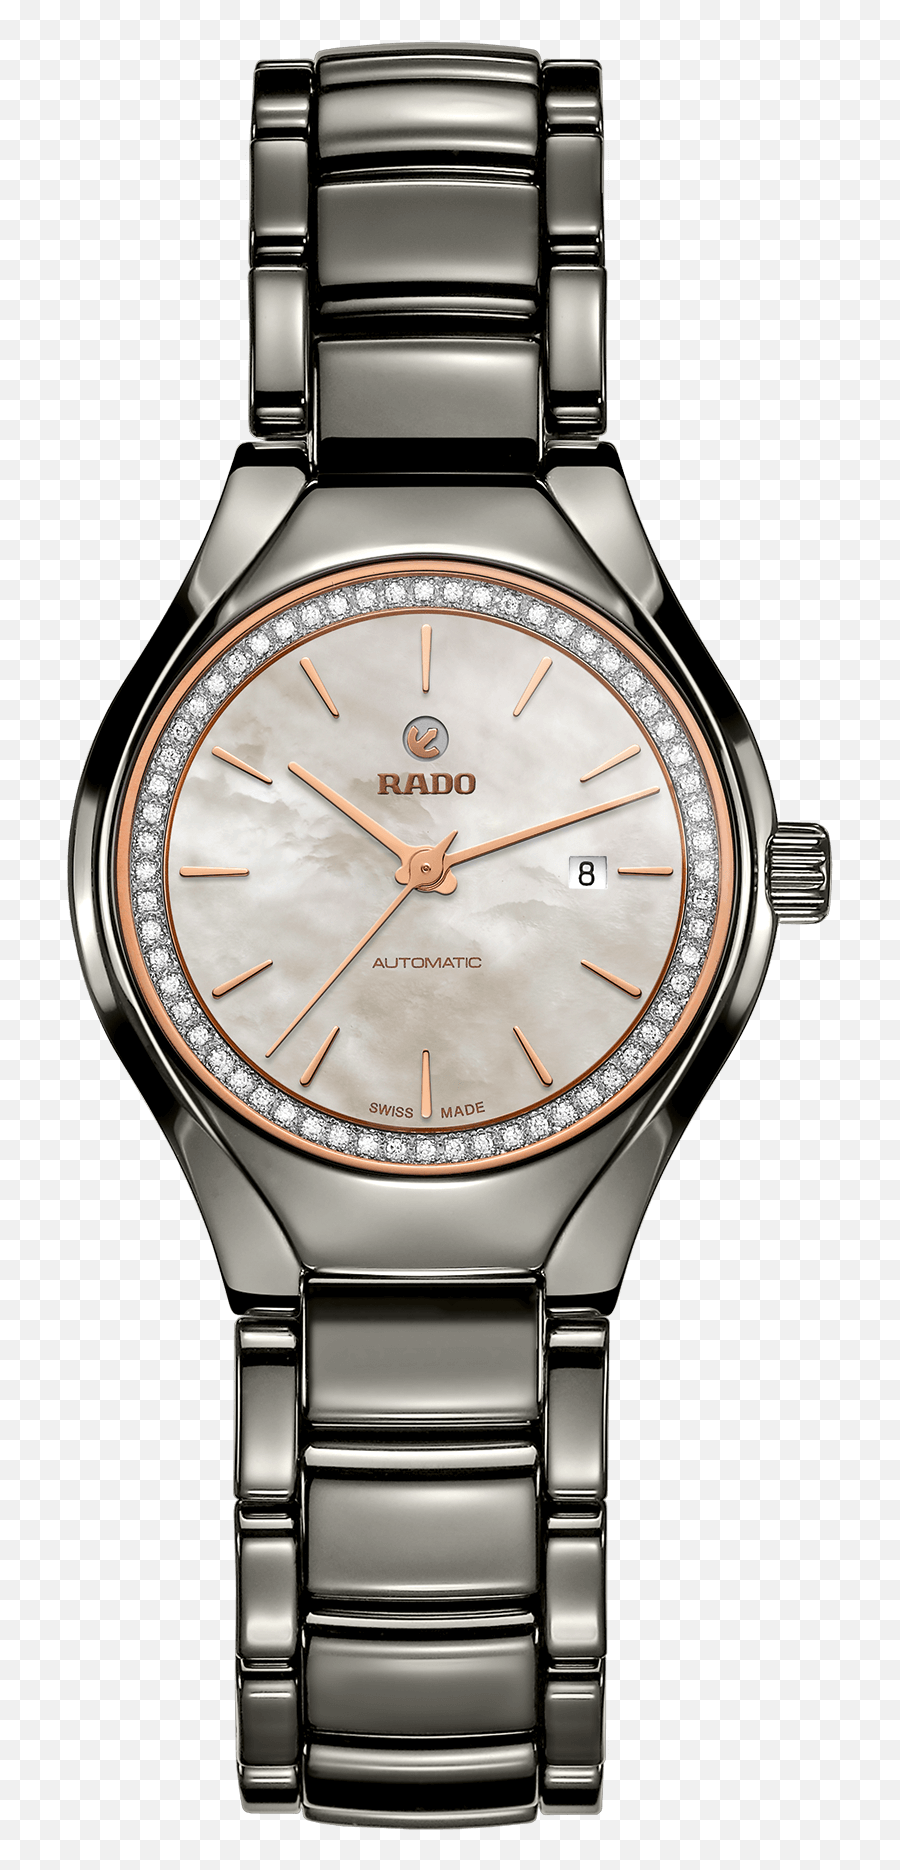 Fake Rolex Watches For Sale - Rado R27243852 Emoji,Big Bang Theory The Emotion Detection Automation Watch Online